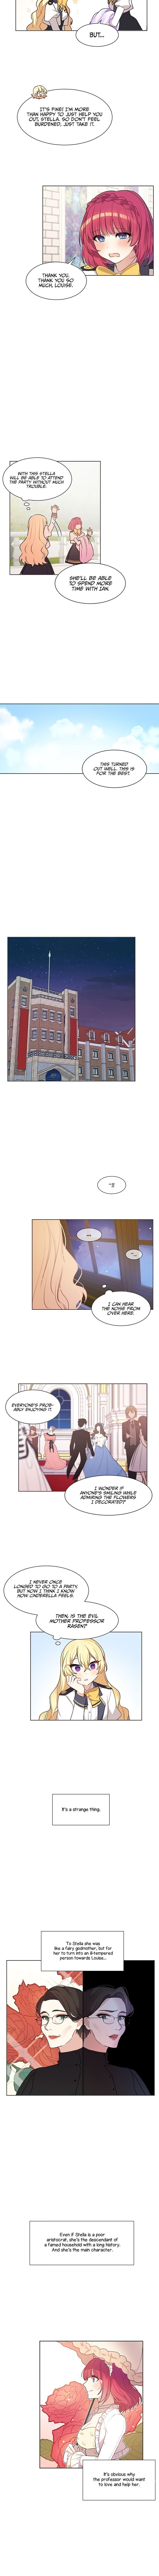 I’m the Male Lead’s Girl Friend Chapter 6 - Page 9